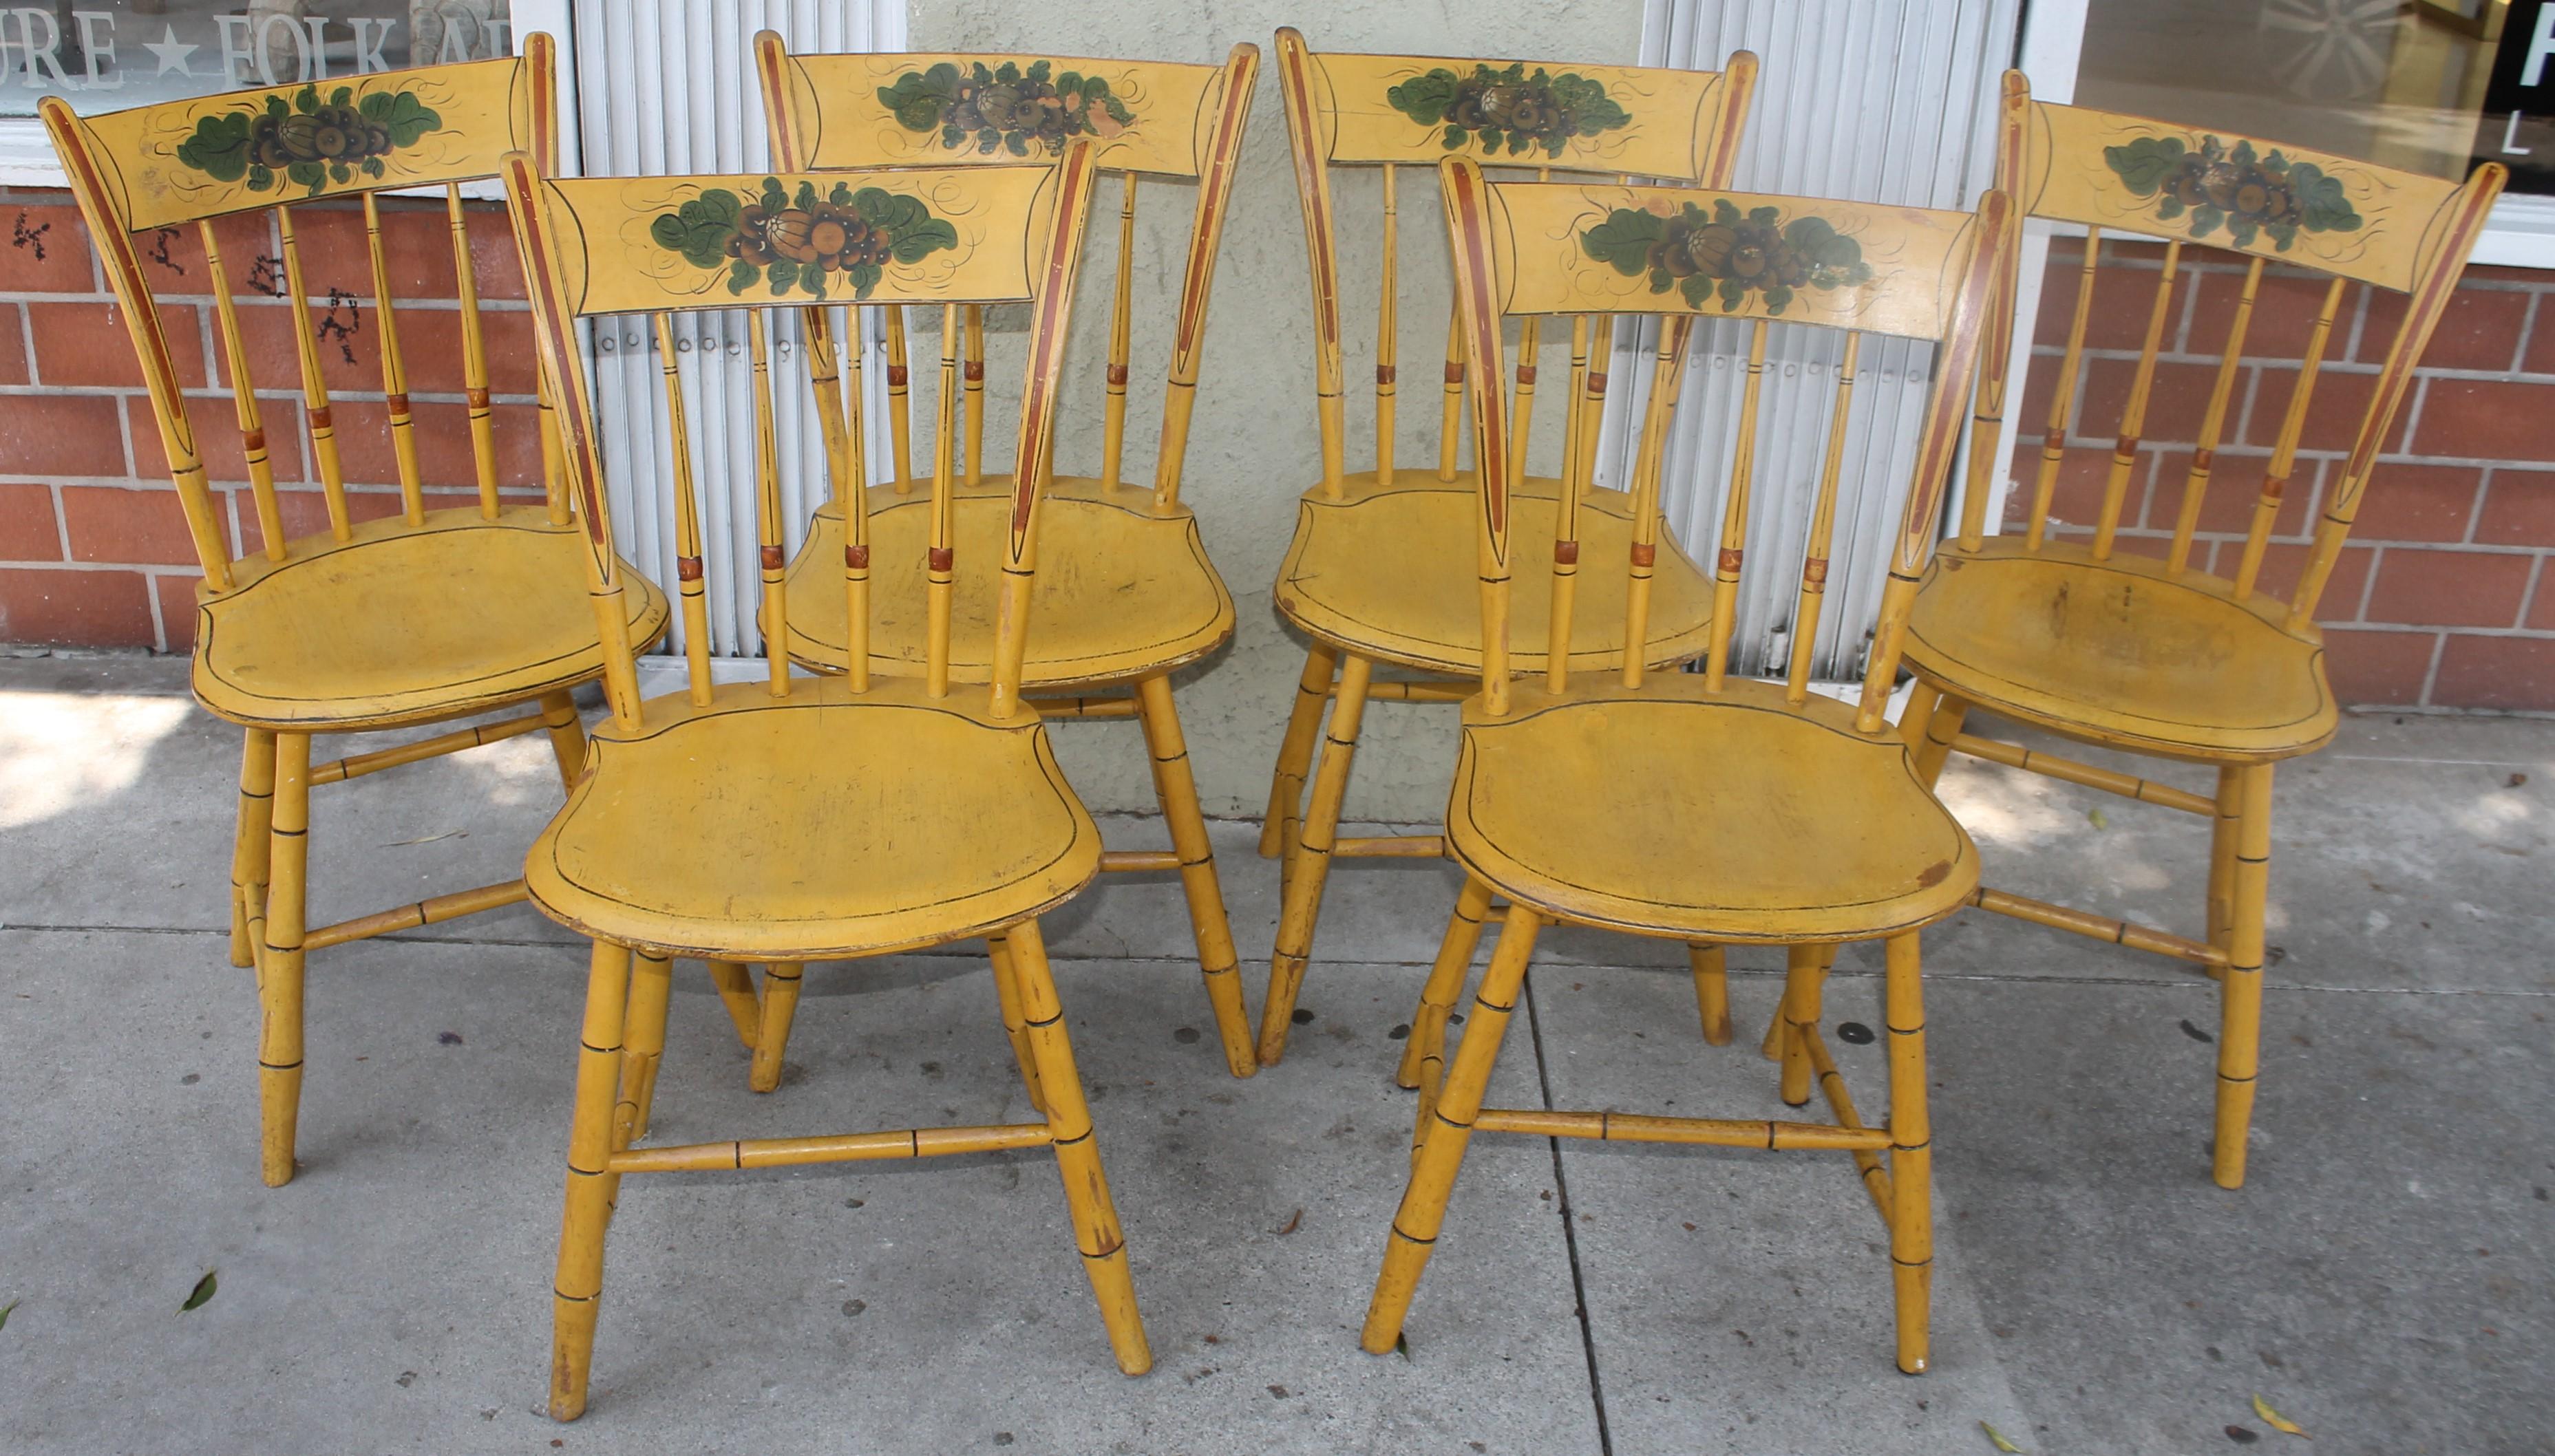 These fine original paint decorated thumb back New England Windsor chairs are in amazing sturdy condition. The painted decorated splash is amazing painted details. The seats may have been touched up by the previous collector. The condition of these